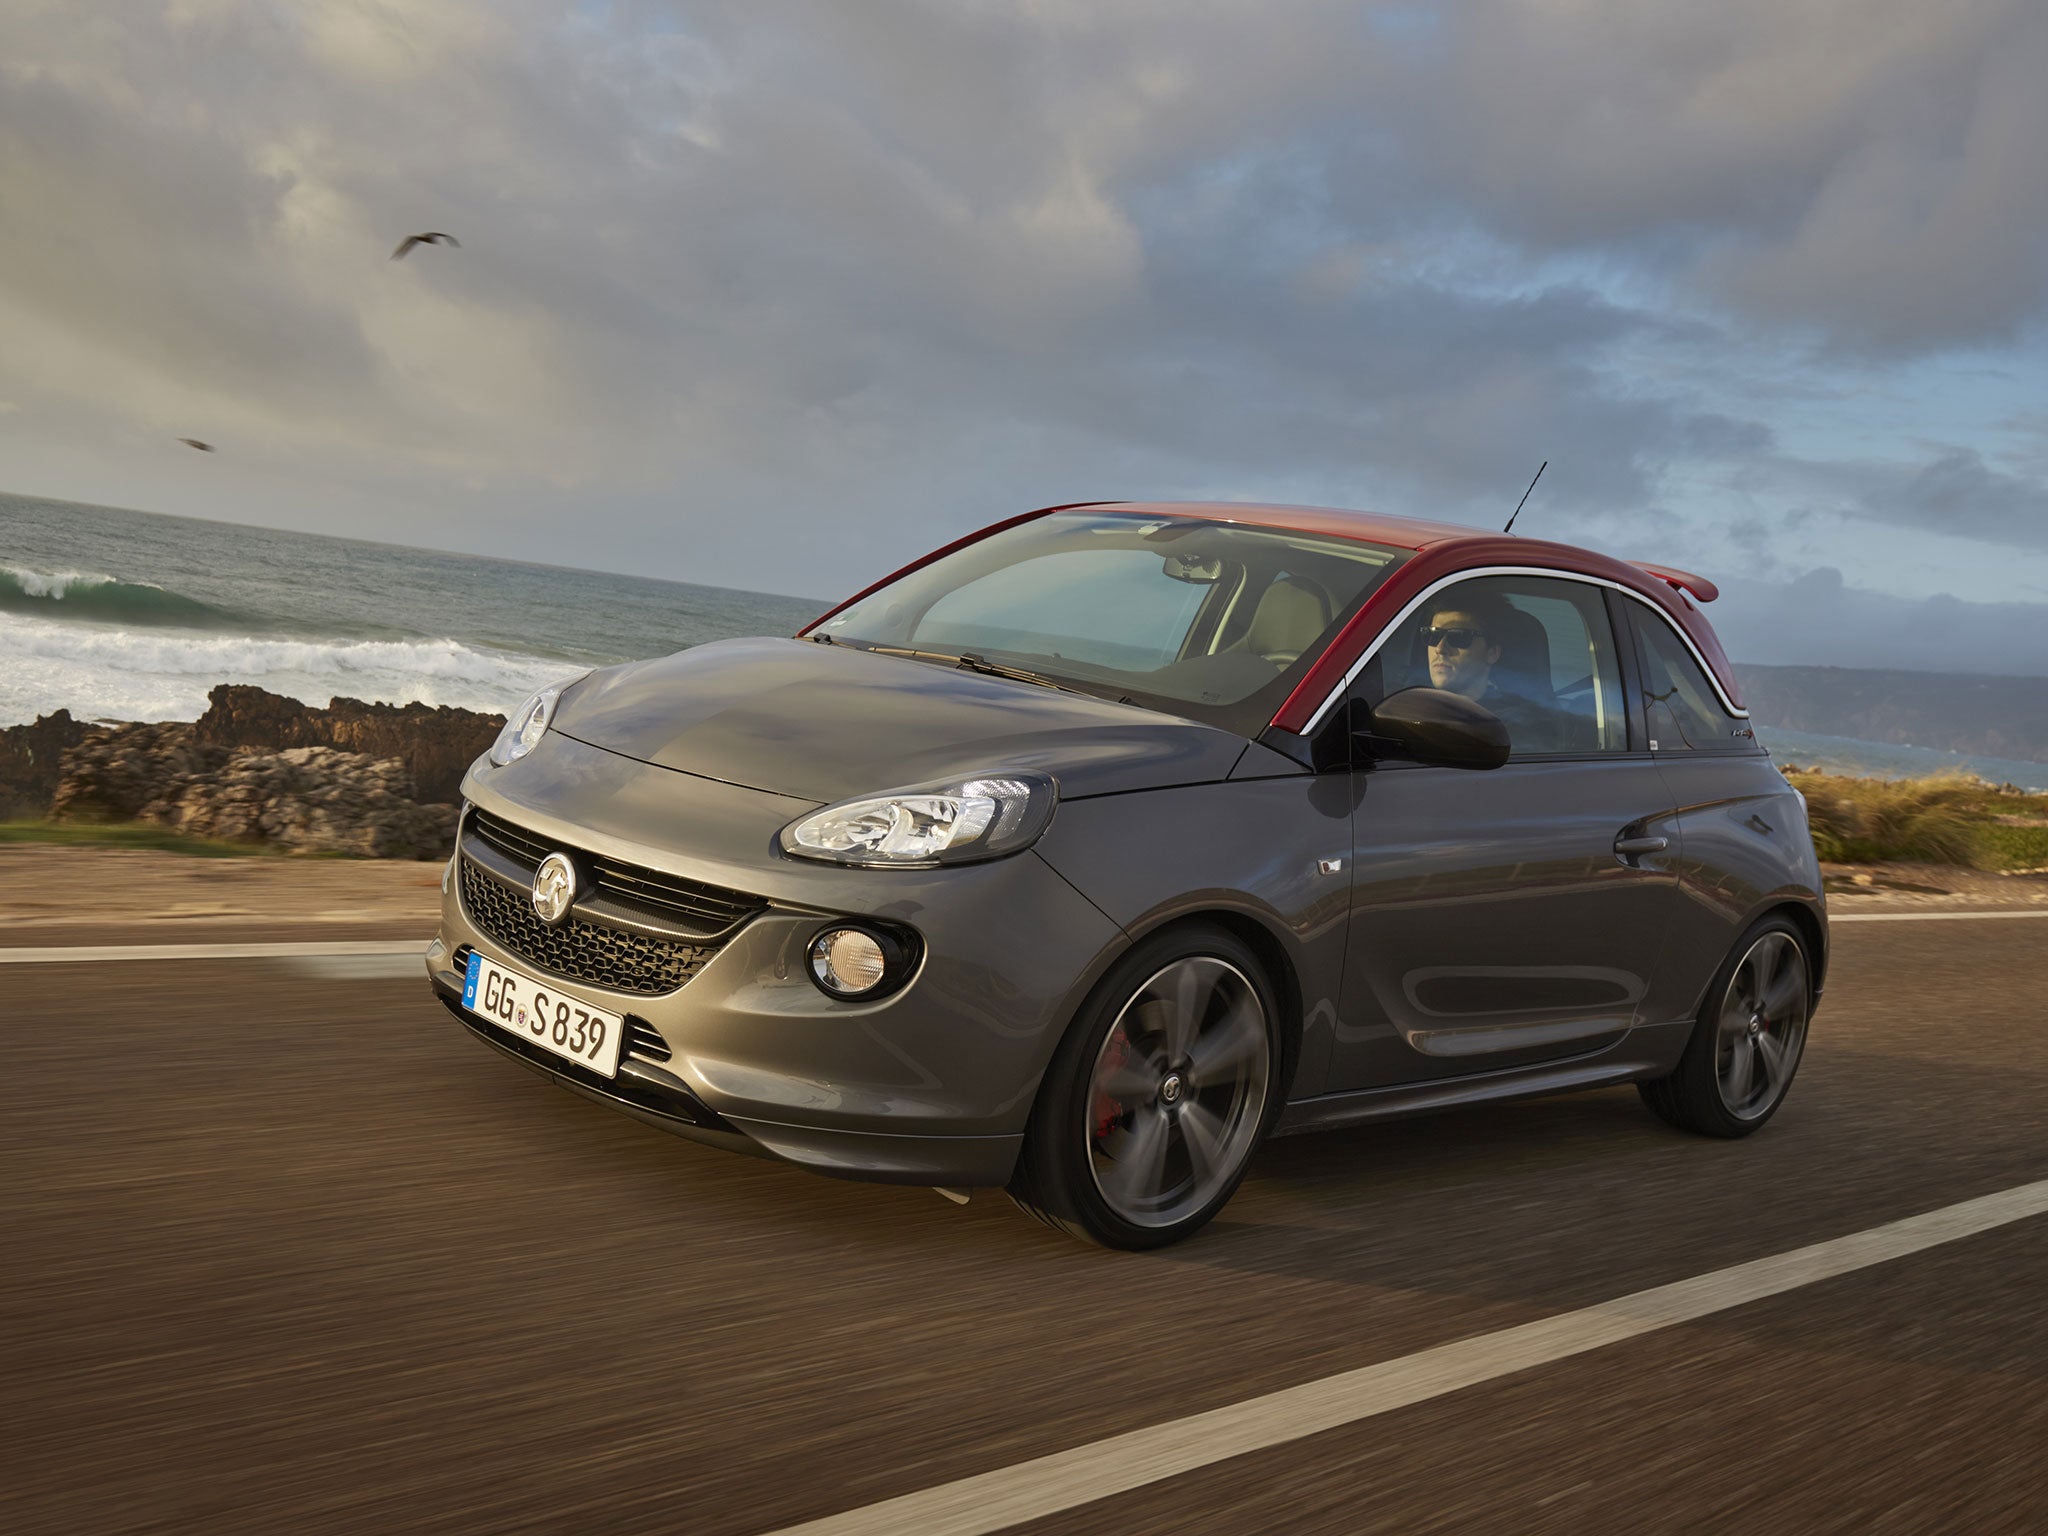 The Grand Slam has a punchy 1.4-litre turbo engine, a massive spoiler and alloy wheels